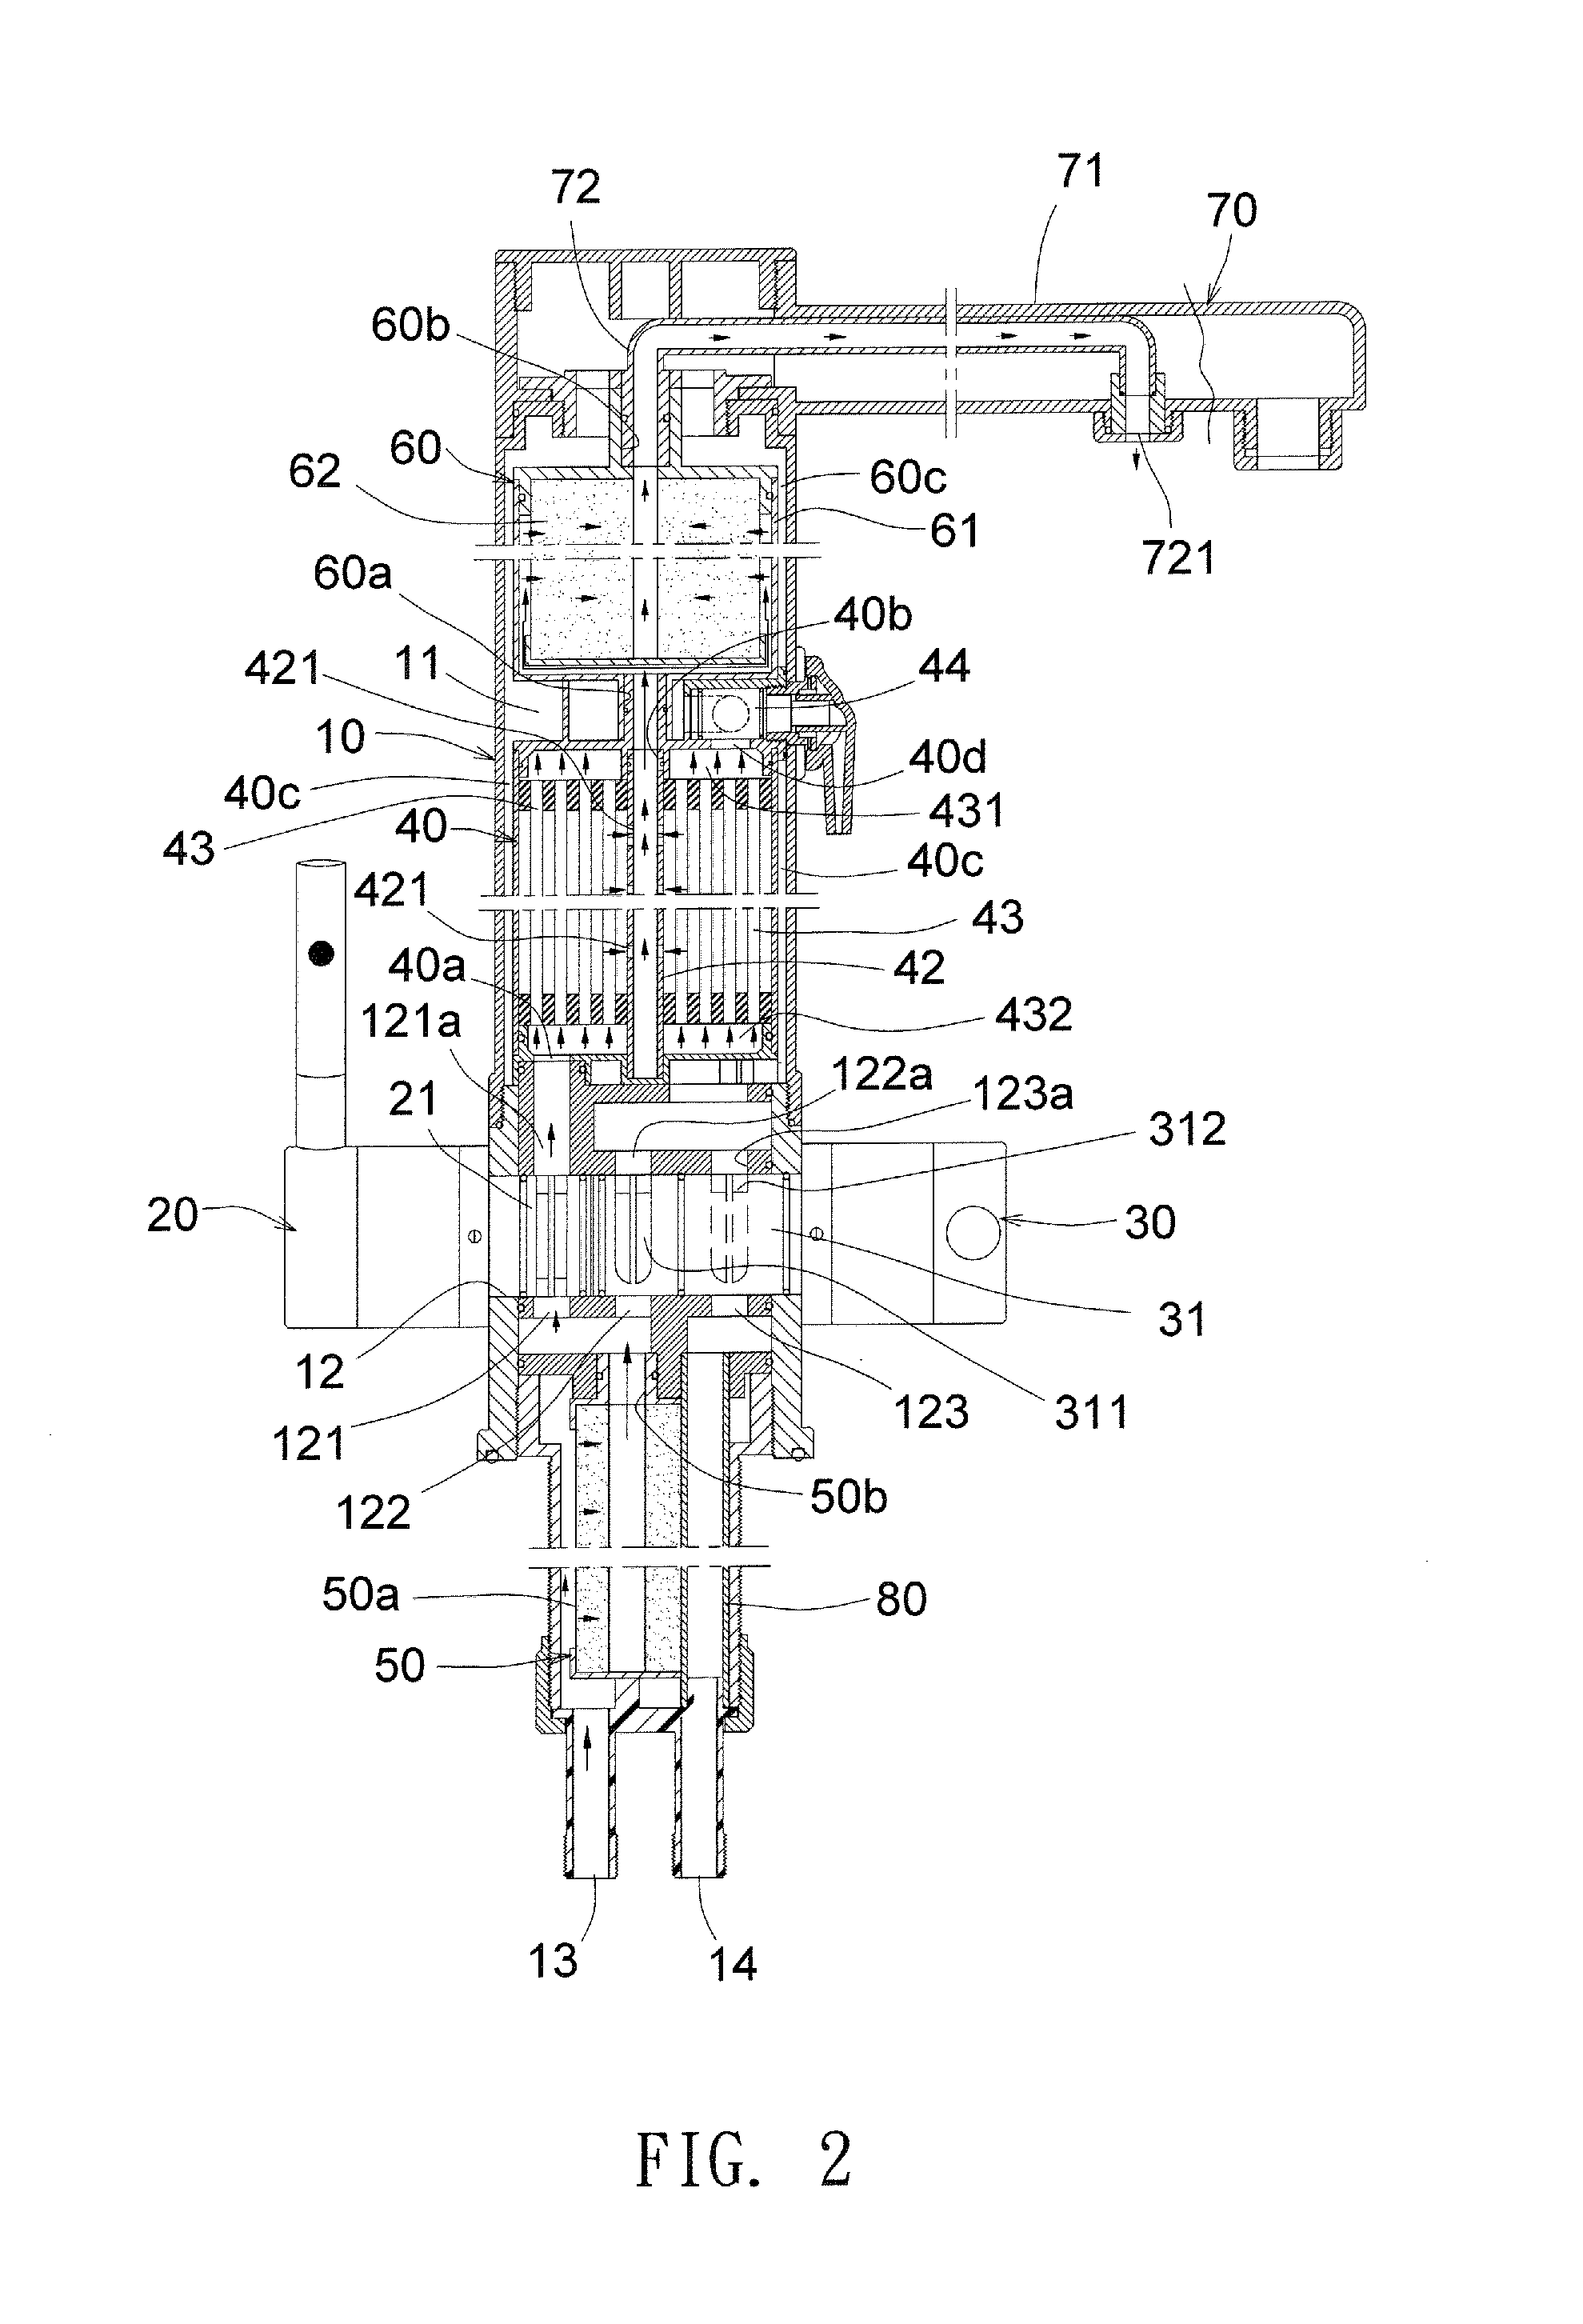 Faucet With Built-In Filter Units